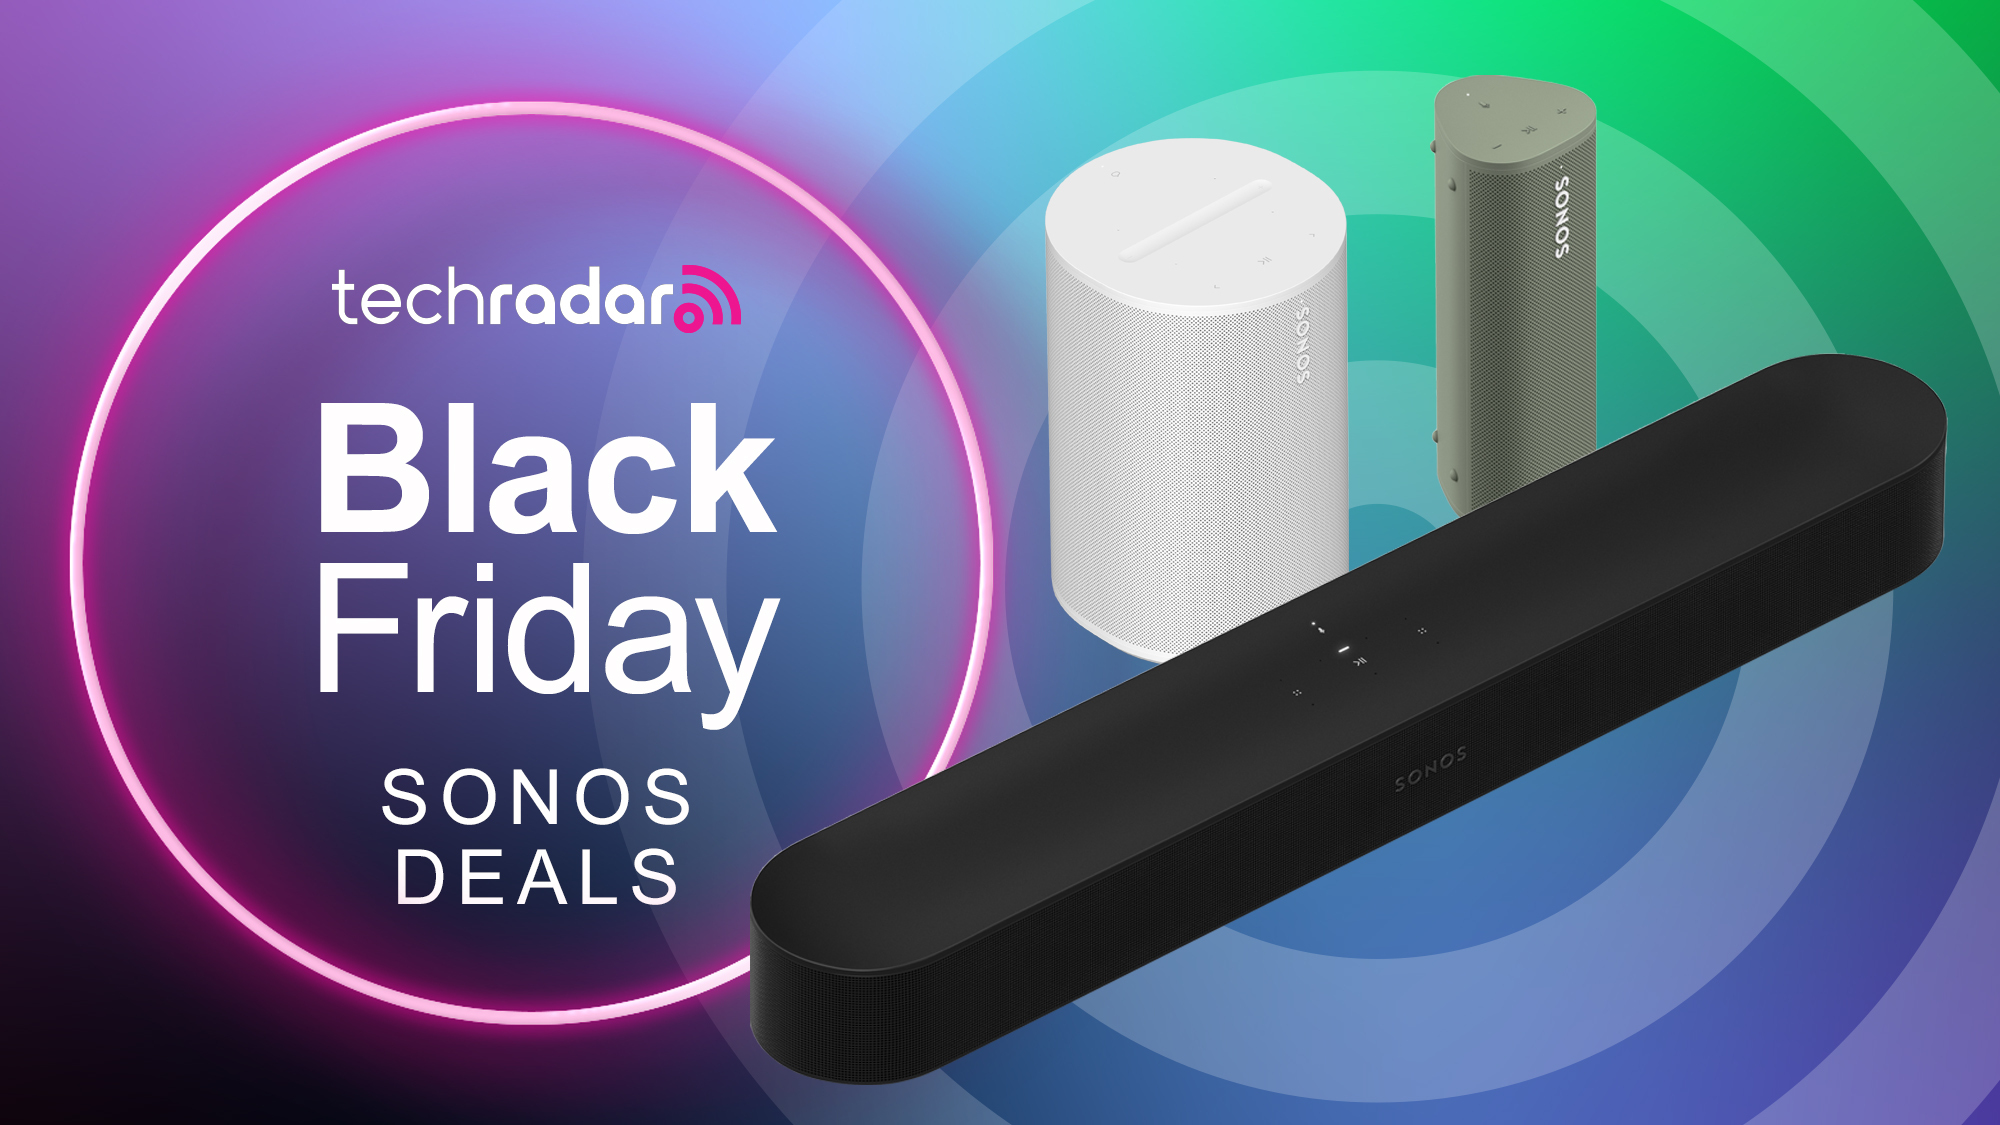 Sonos early Black Friday deals discount home theater sets by 20 percent